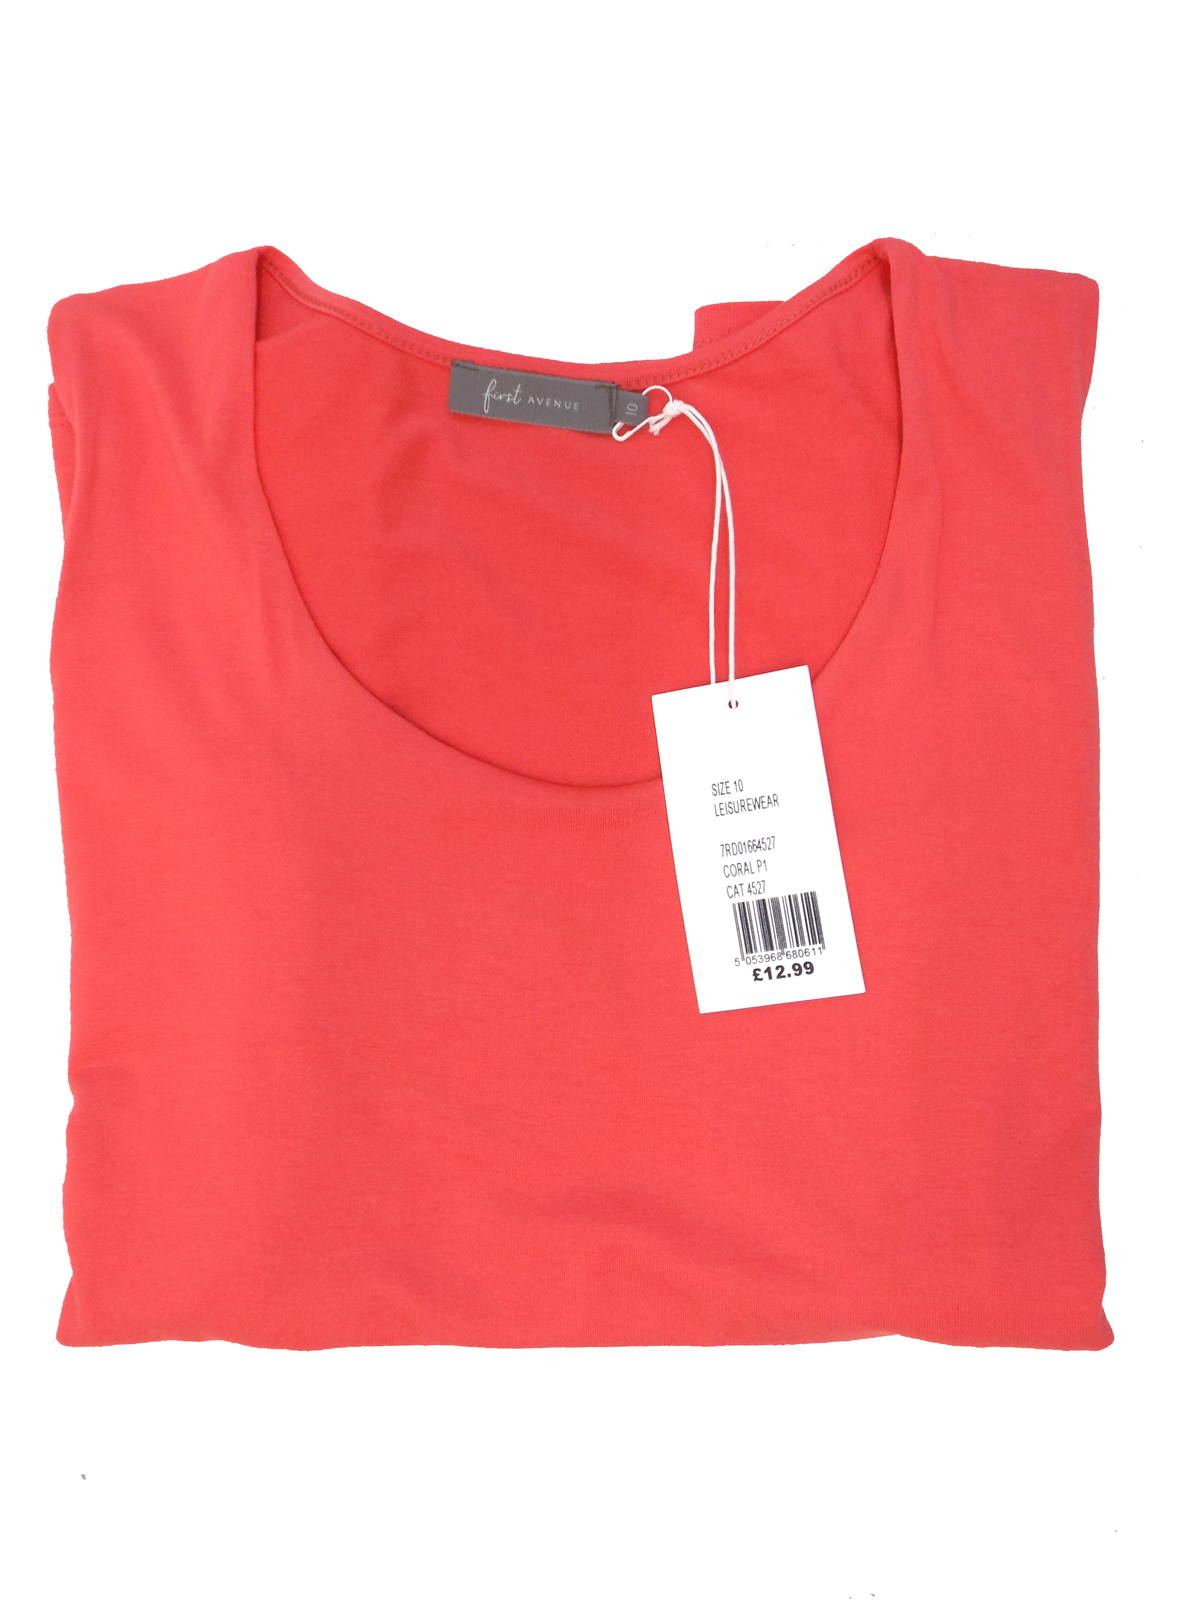 First Avenue CORAL Lined Front Panel Jersey Vest Top - Size 10 to 20